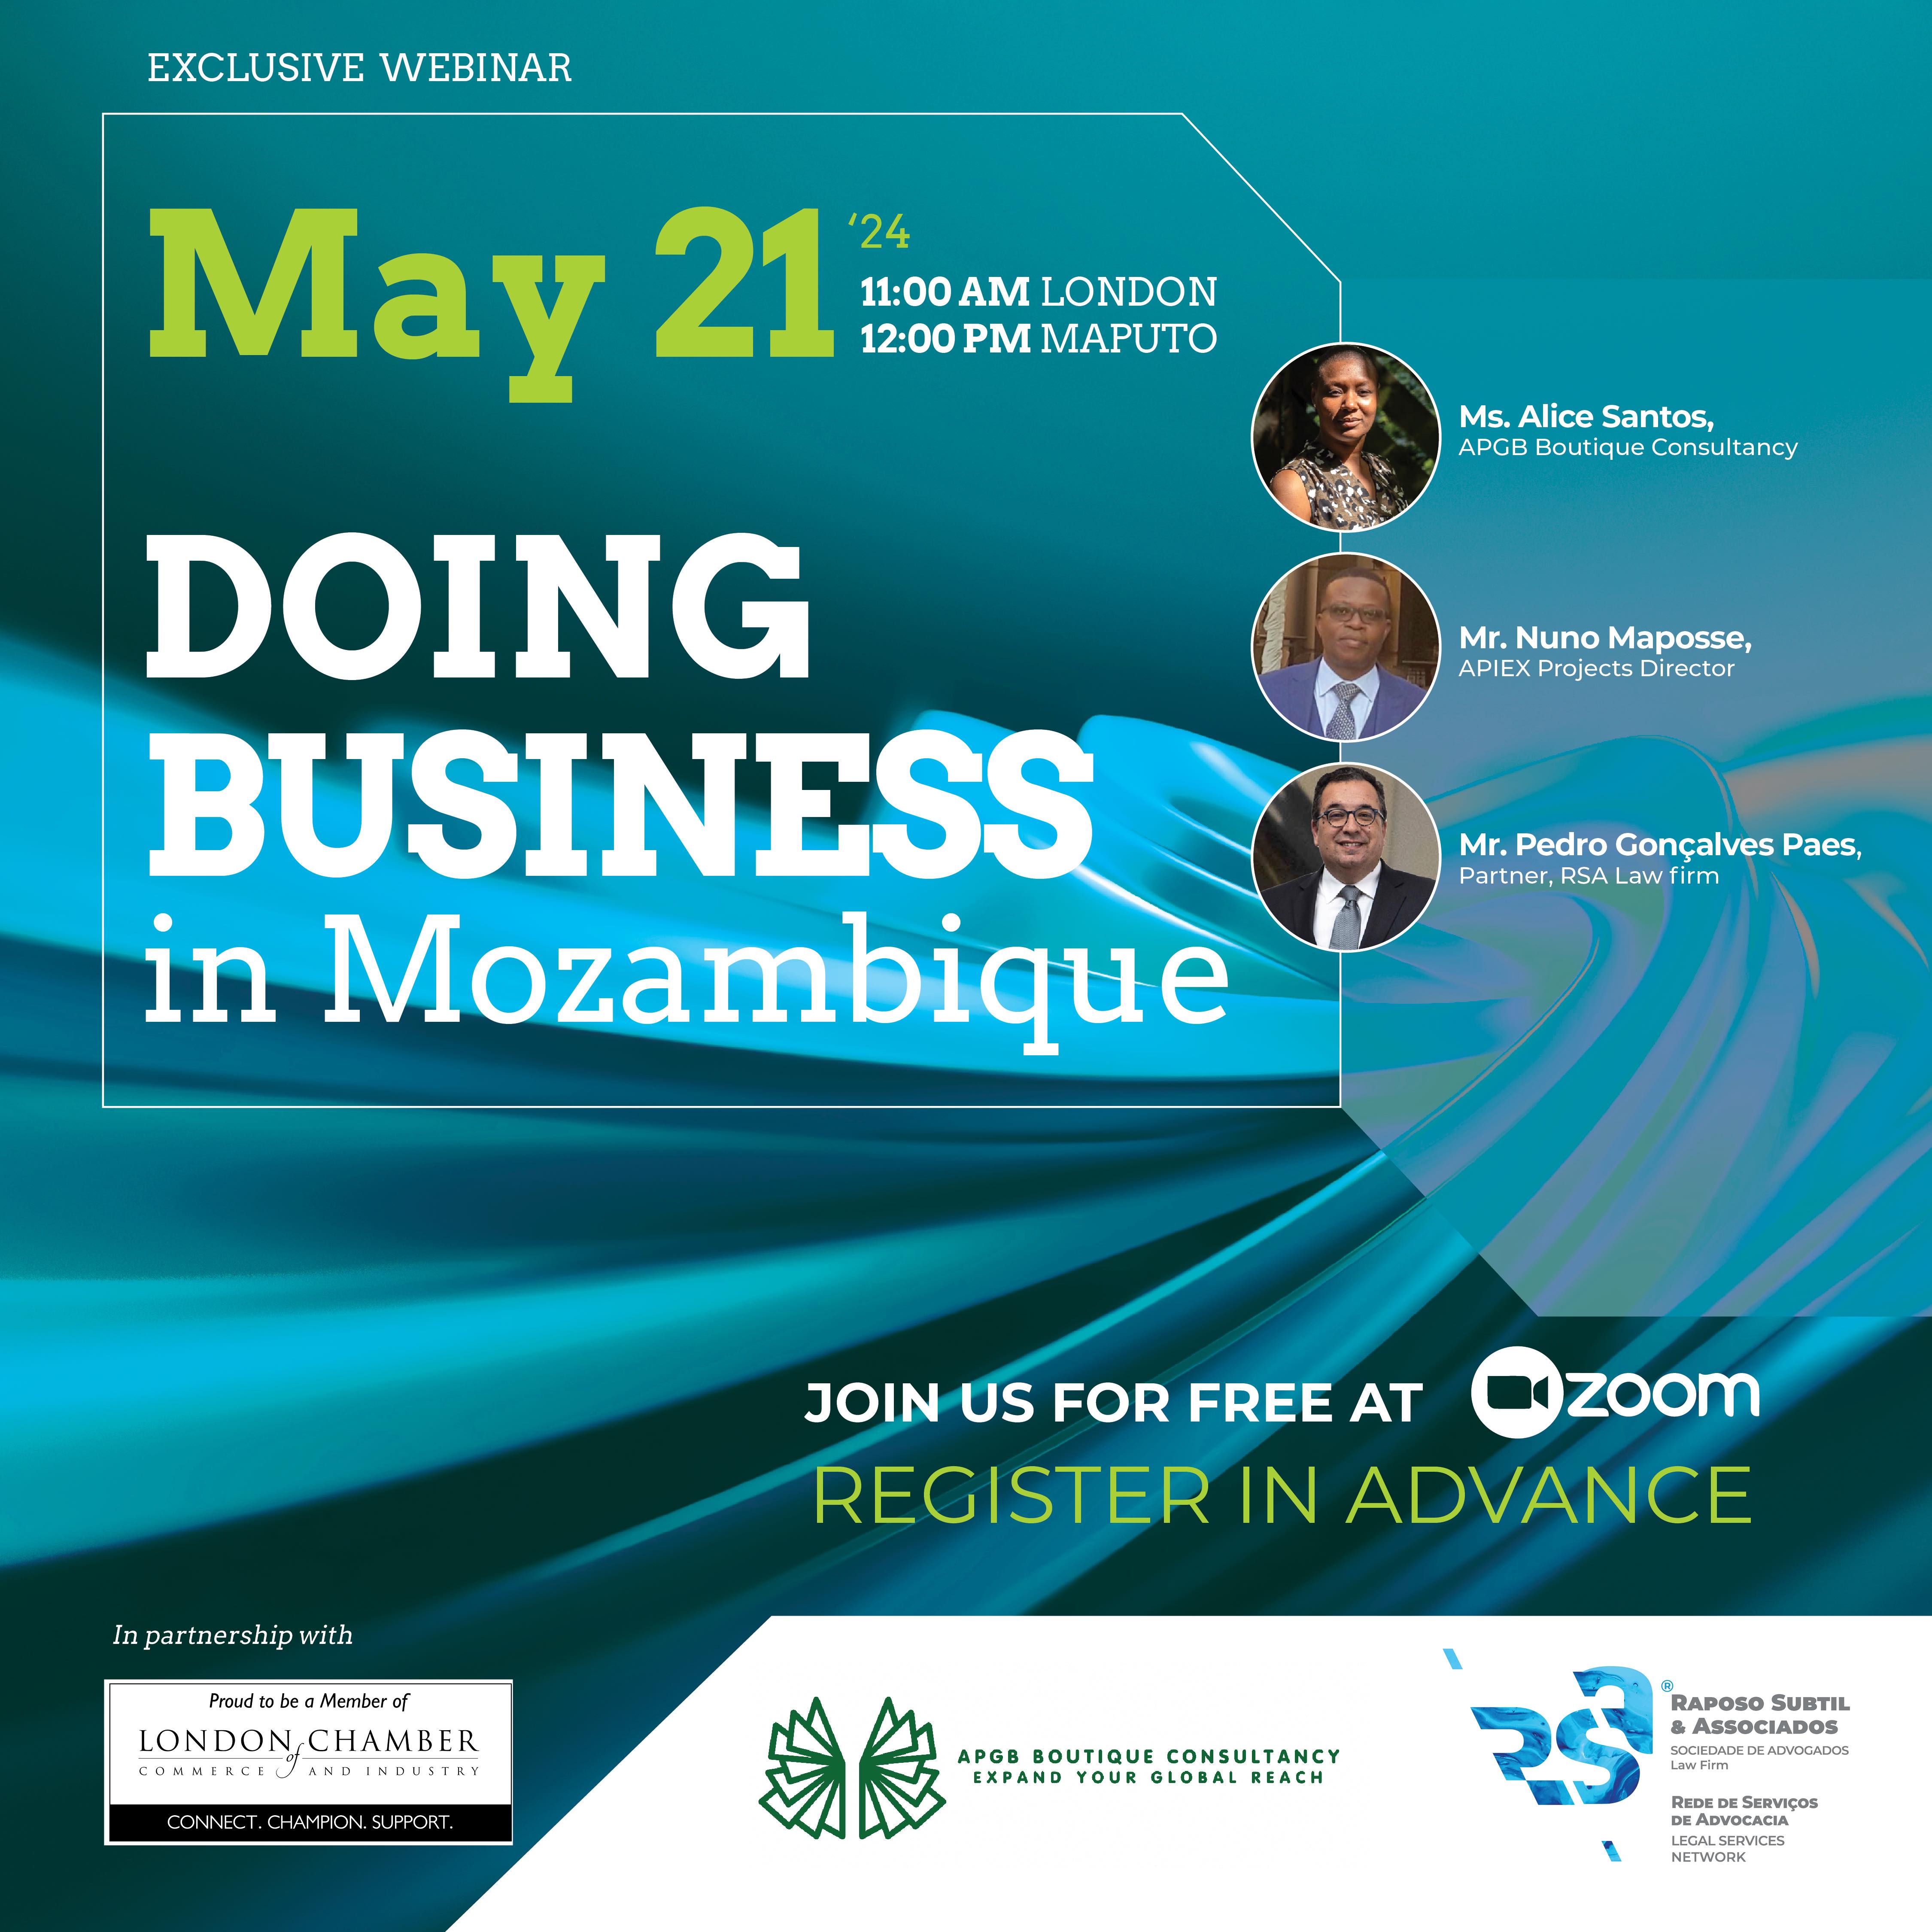 Doing Business in Mozambique organized by APGB Boutique Consultancy